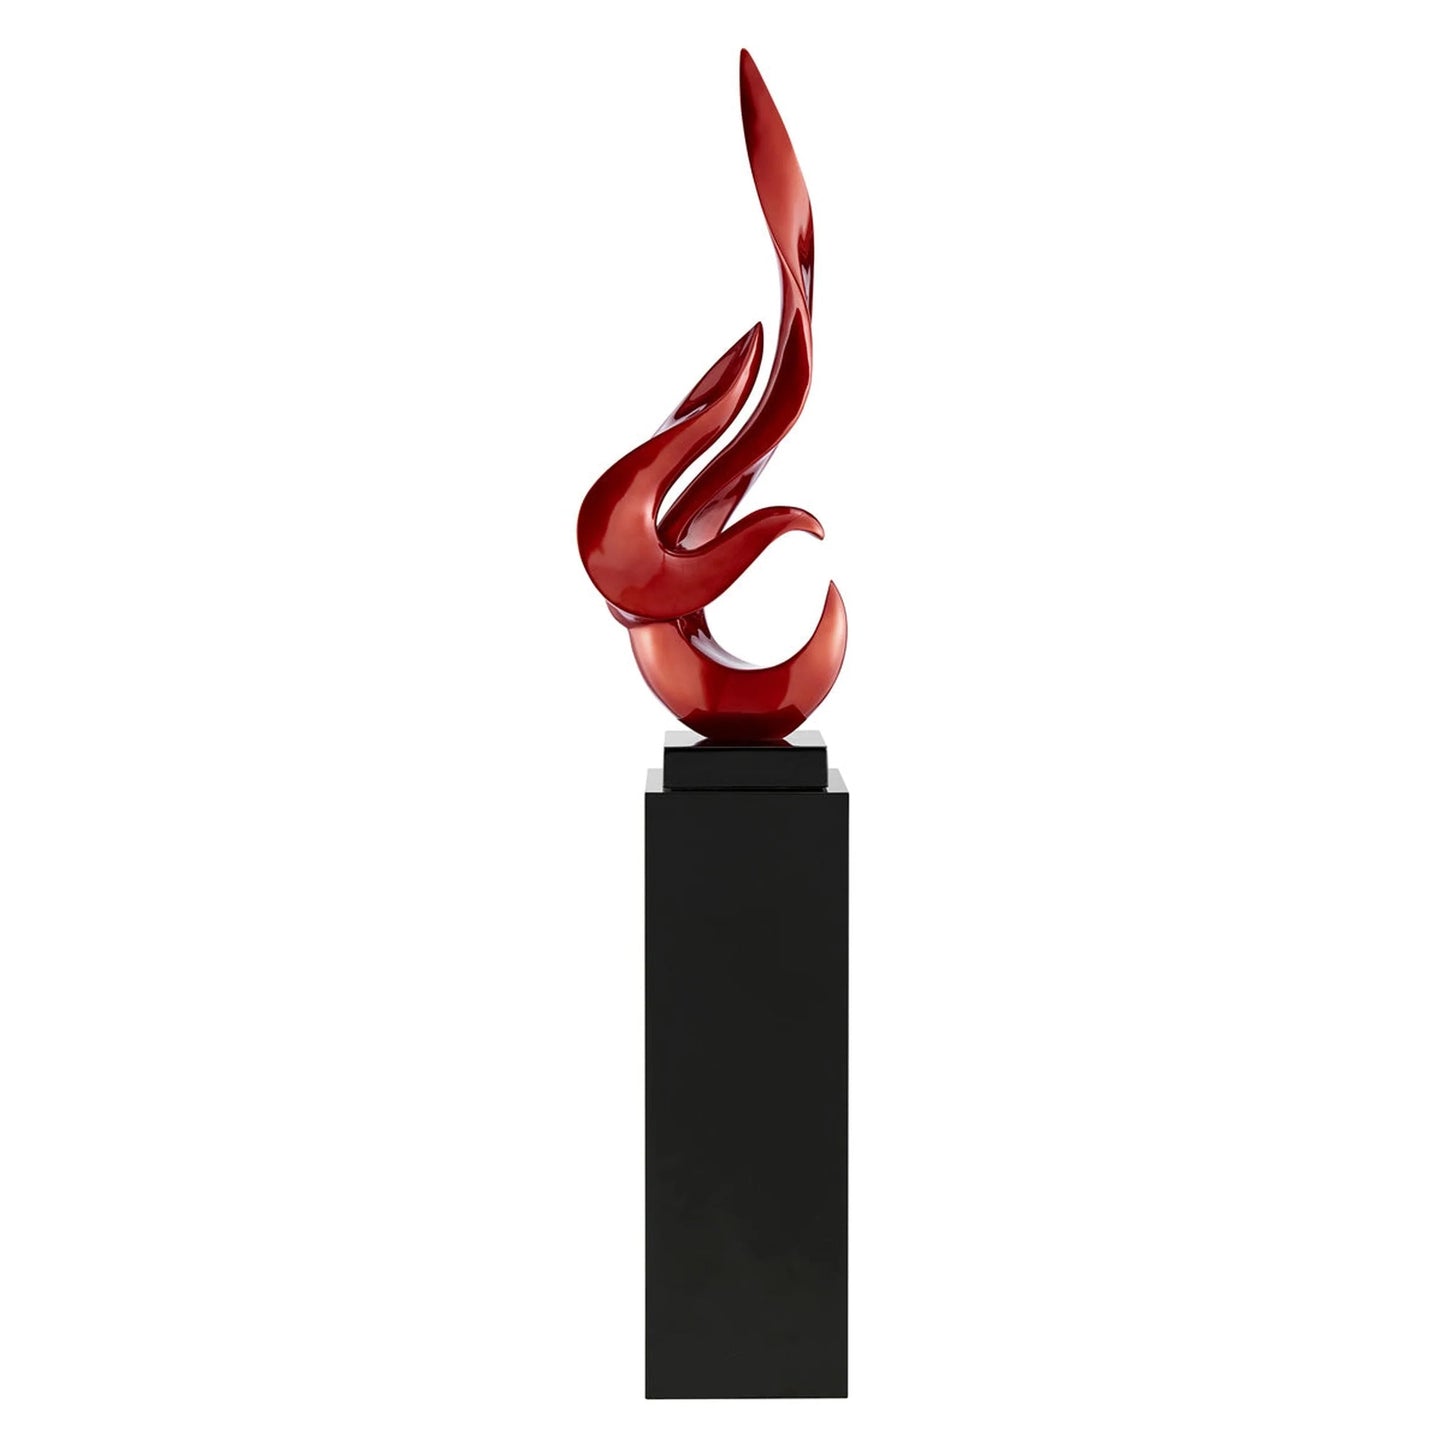 Finesse Decor Metallic Red Flame Floor Sculpture With Black Stand 1